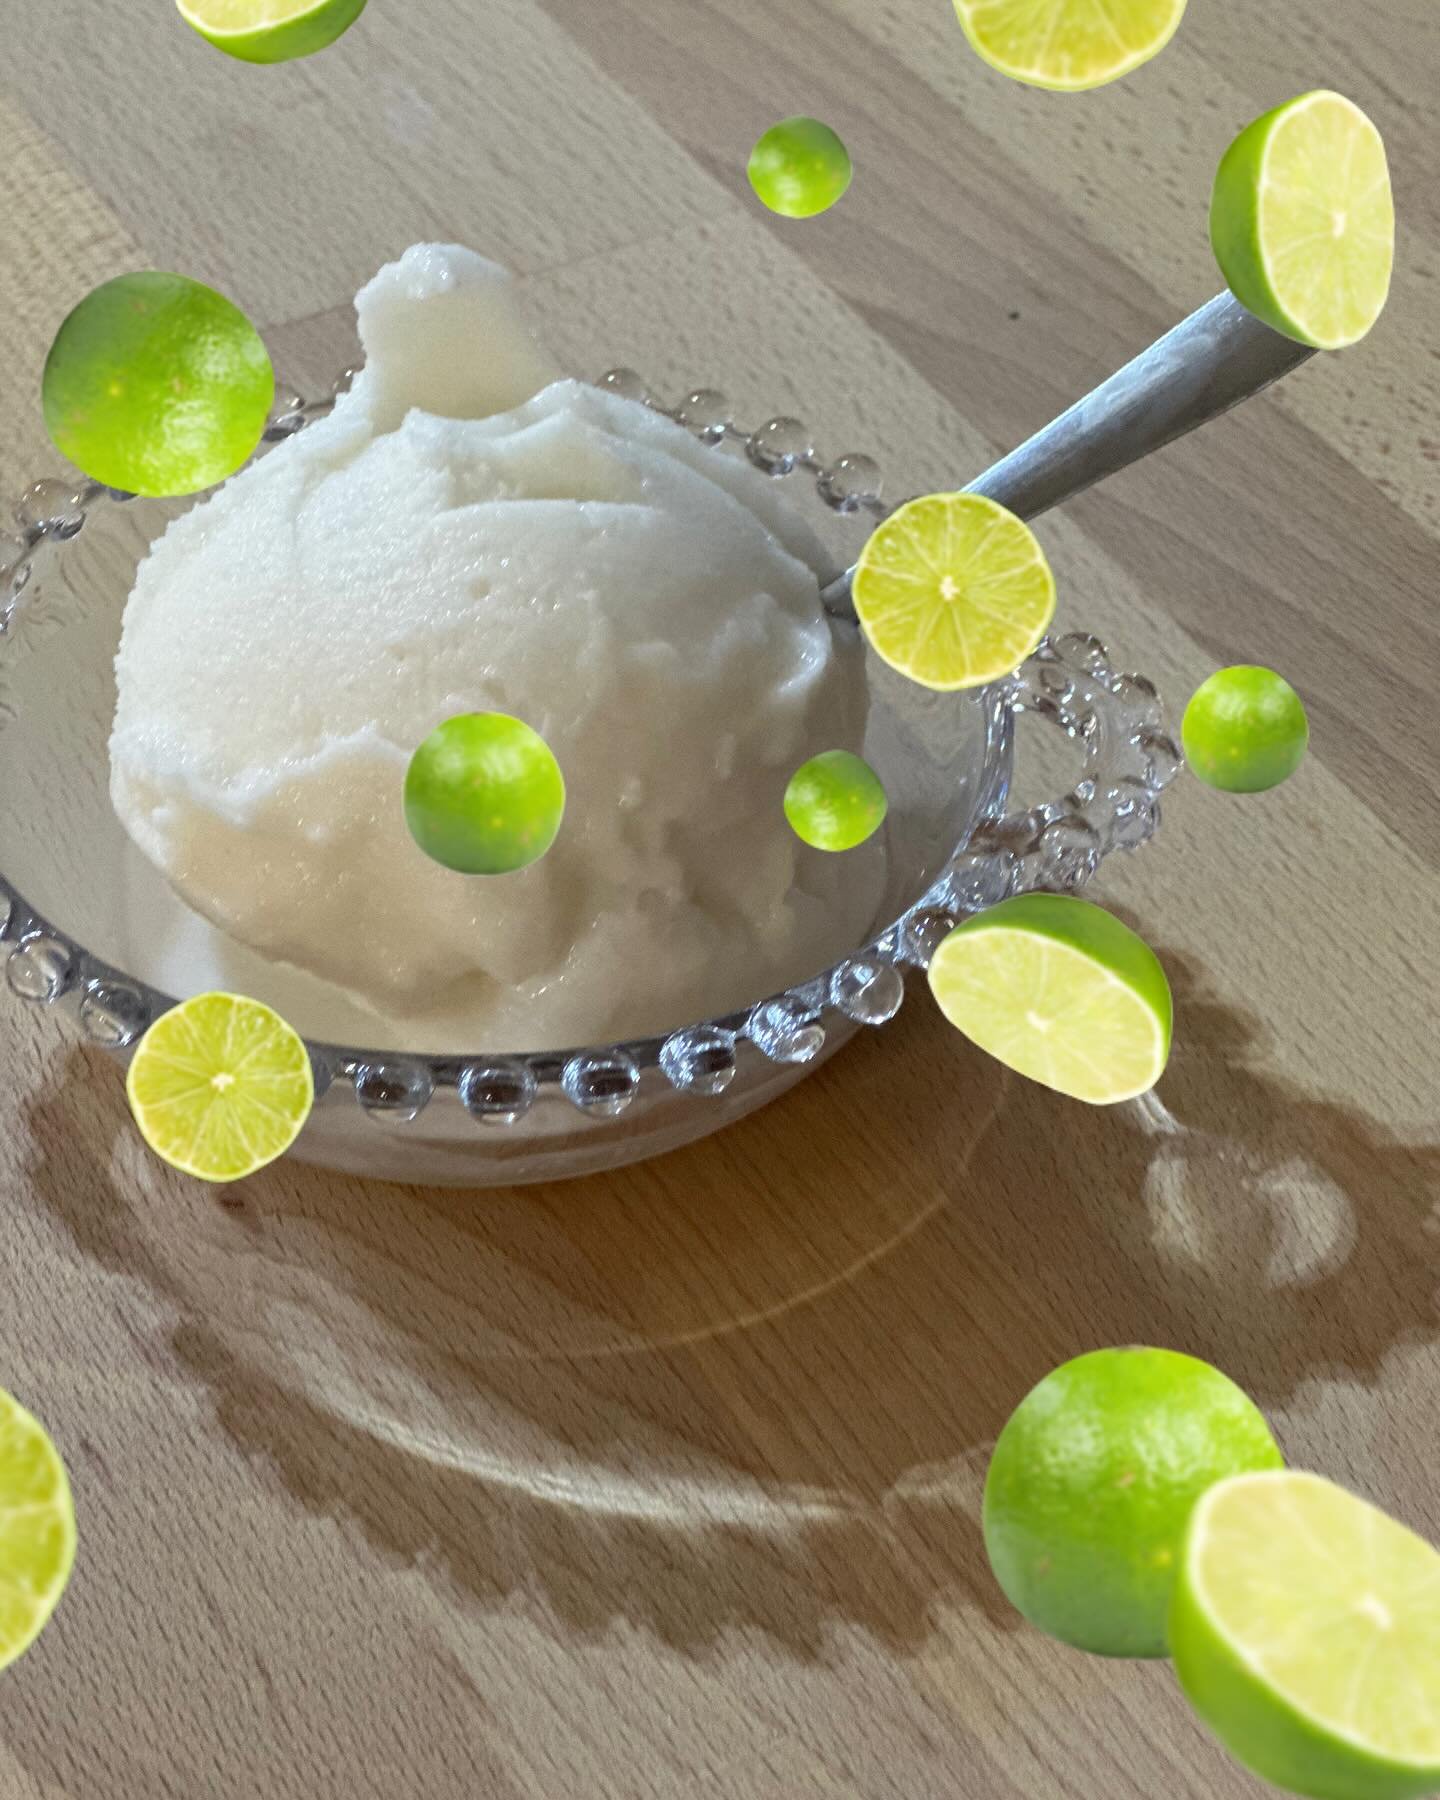 Vegan Lime Sherbet - one of our delicious June seasonal flavors!  Made with fresh squeezed lime juice and house made macadamia/oat/coconut milk blend!  Available soon at your local vendor!  For a full list of vendors visit thirdbowl.com and check our